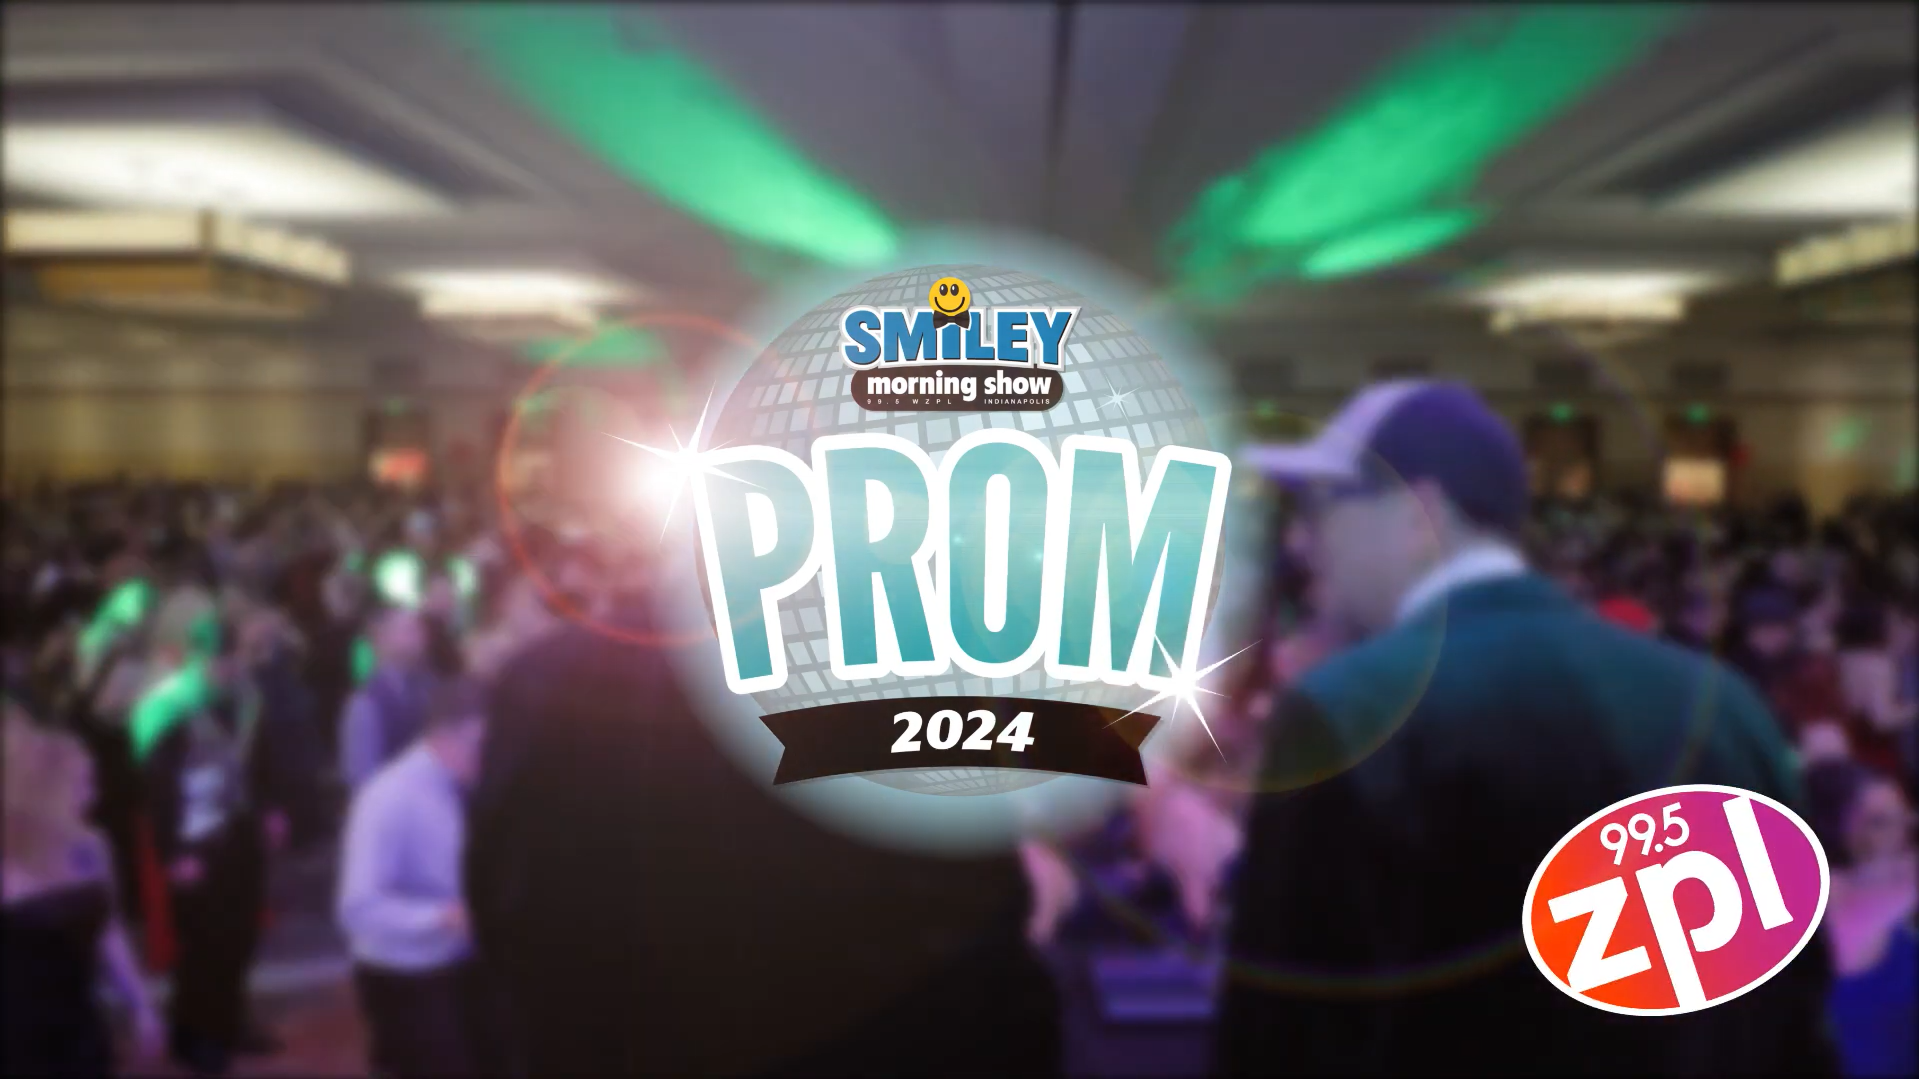 VIDEO: Smiley Prom 2024!